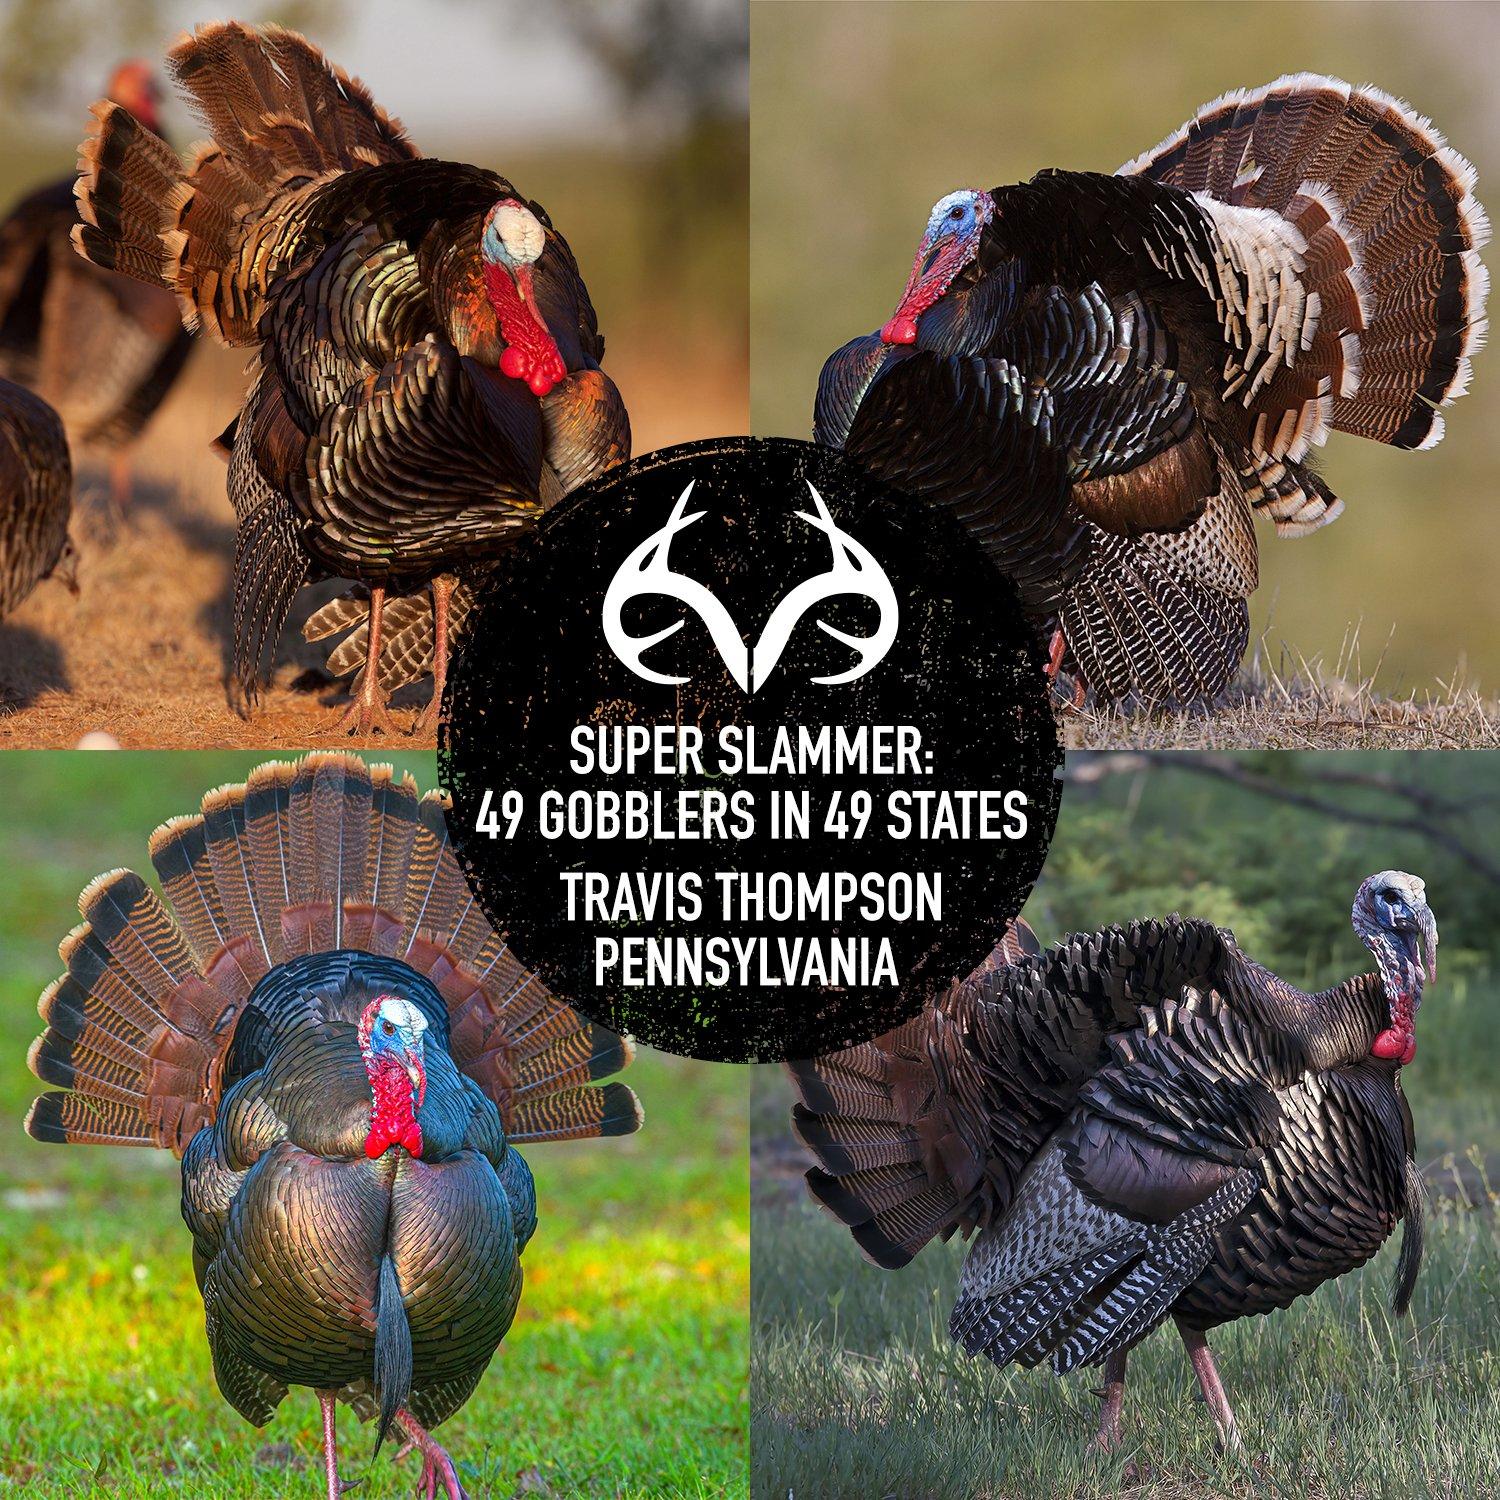 To accomplish a Super Slam, the hunter must take one turkey in every state but Alaska (no turkeys live there). Rio Grande image by Russell Graves; Merriam's image by Tom Reichner; Osceola image by Chase D'animulls; Eastern image by Jim Cummings